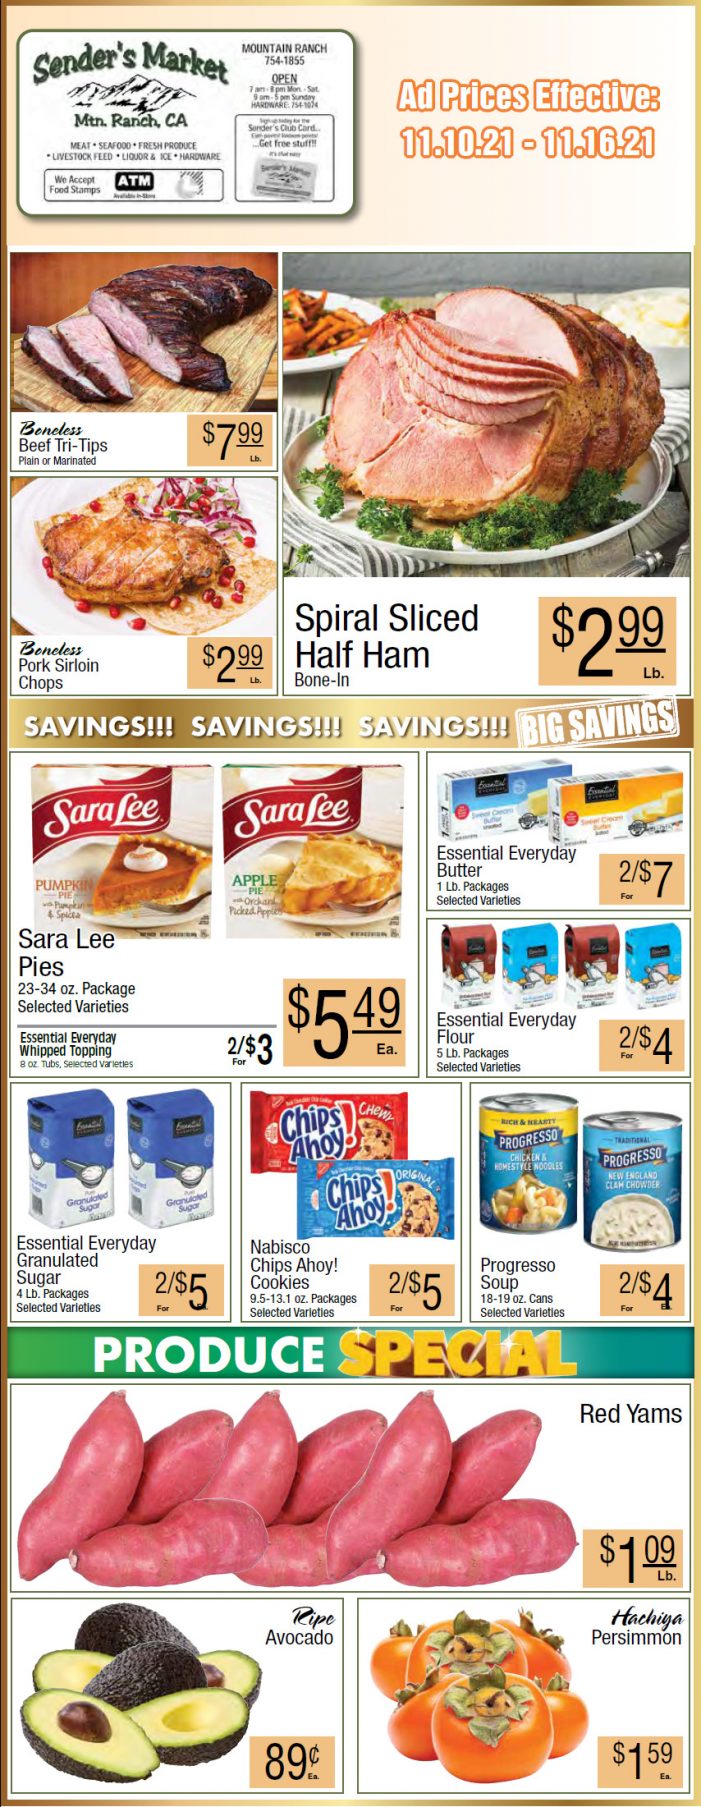 Sender’s Market’s Weekly Ad & Grocery Specials Through November 16th! Shop Local & Save!